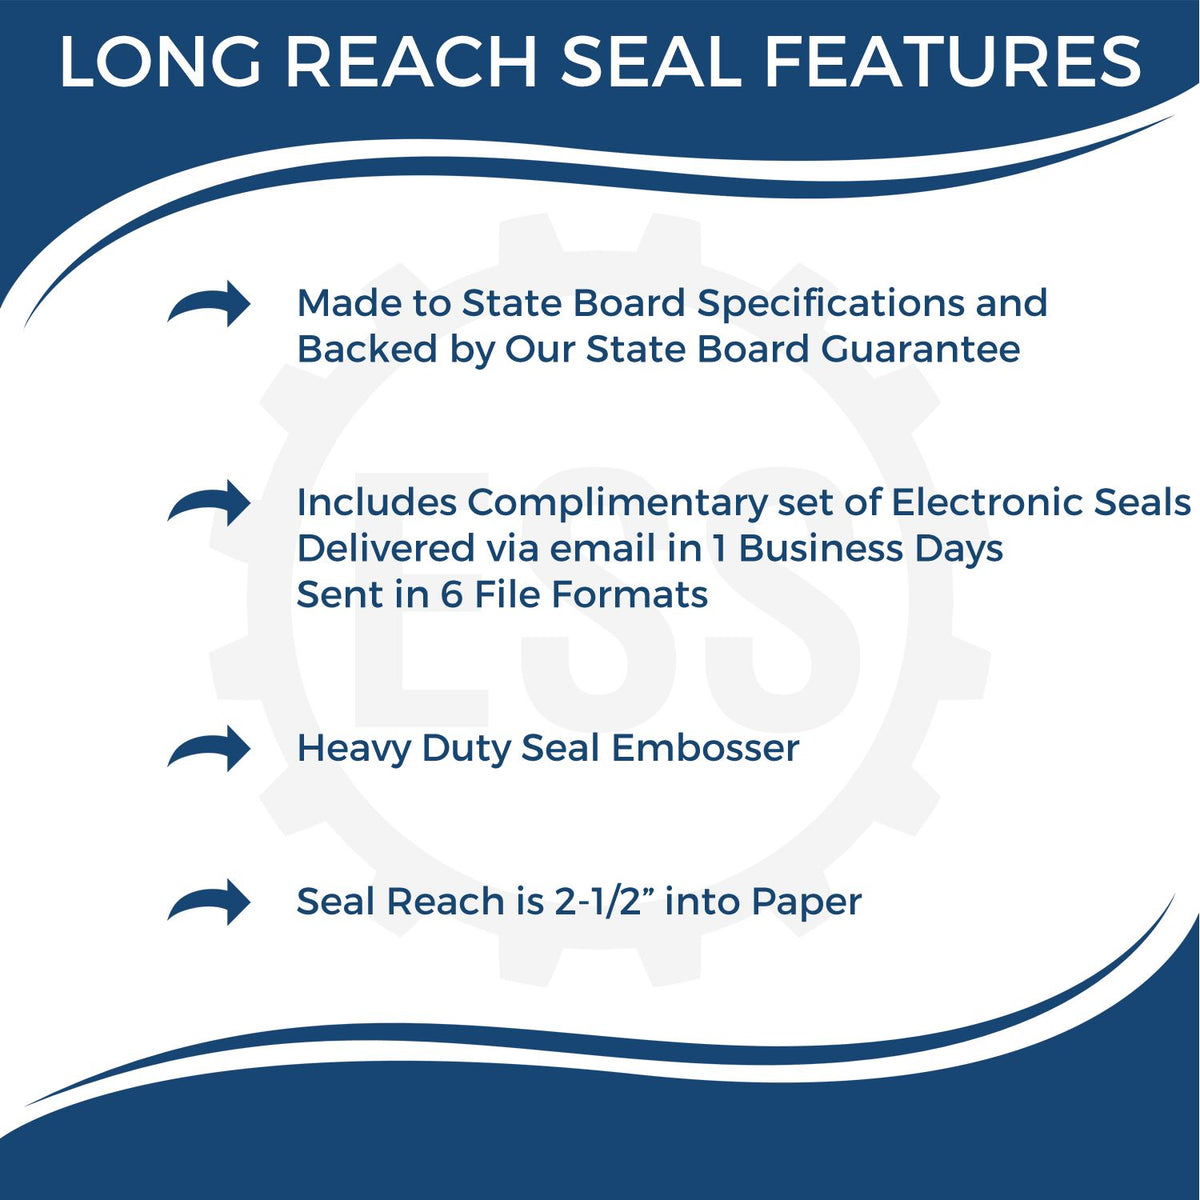 A picture of an infographic highlighting the selling points for the Long Reach Missouri Land Surveyor Seal